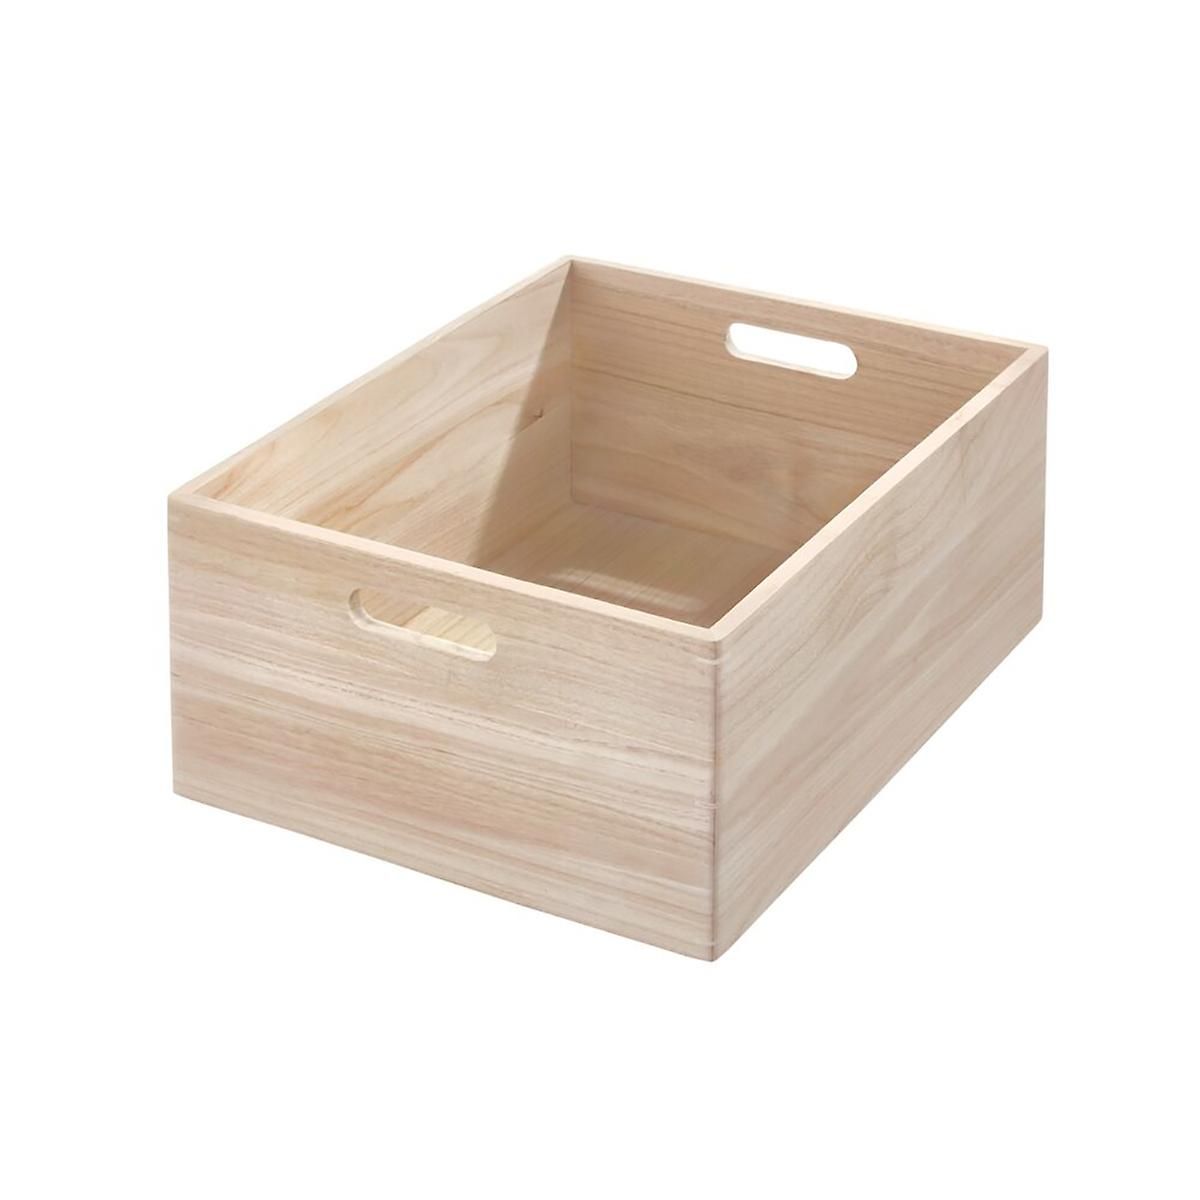 THE HOME EDIT X-Large Wooden Bin Sand | The Container Store